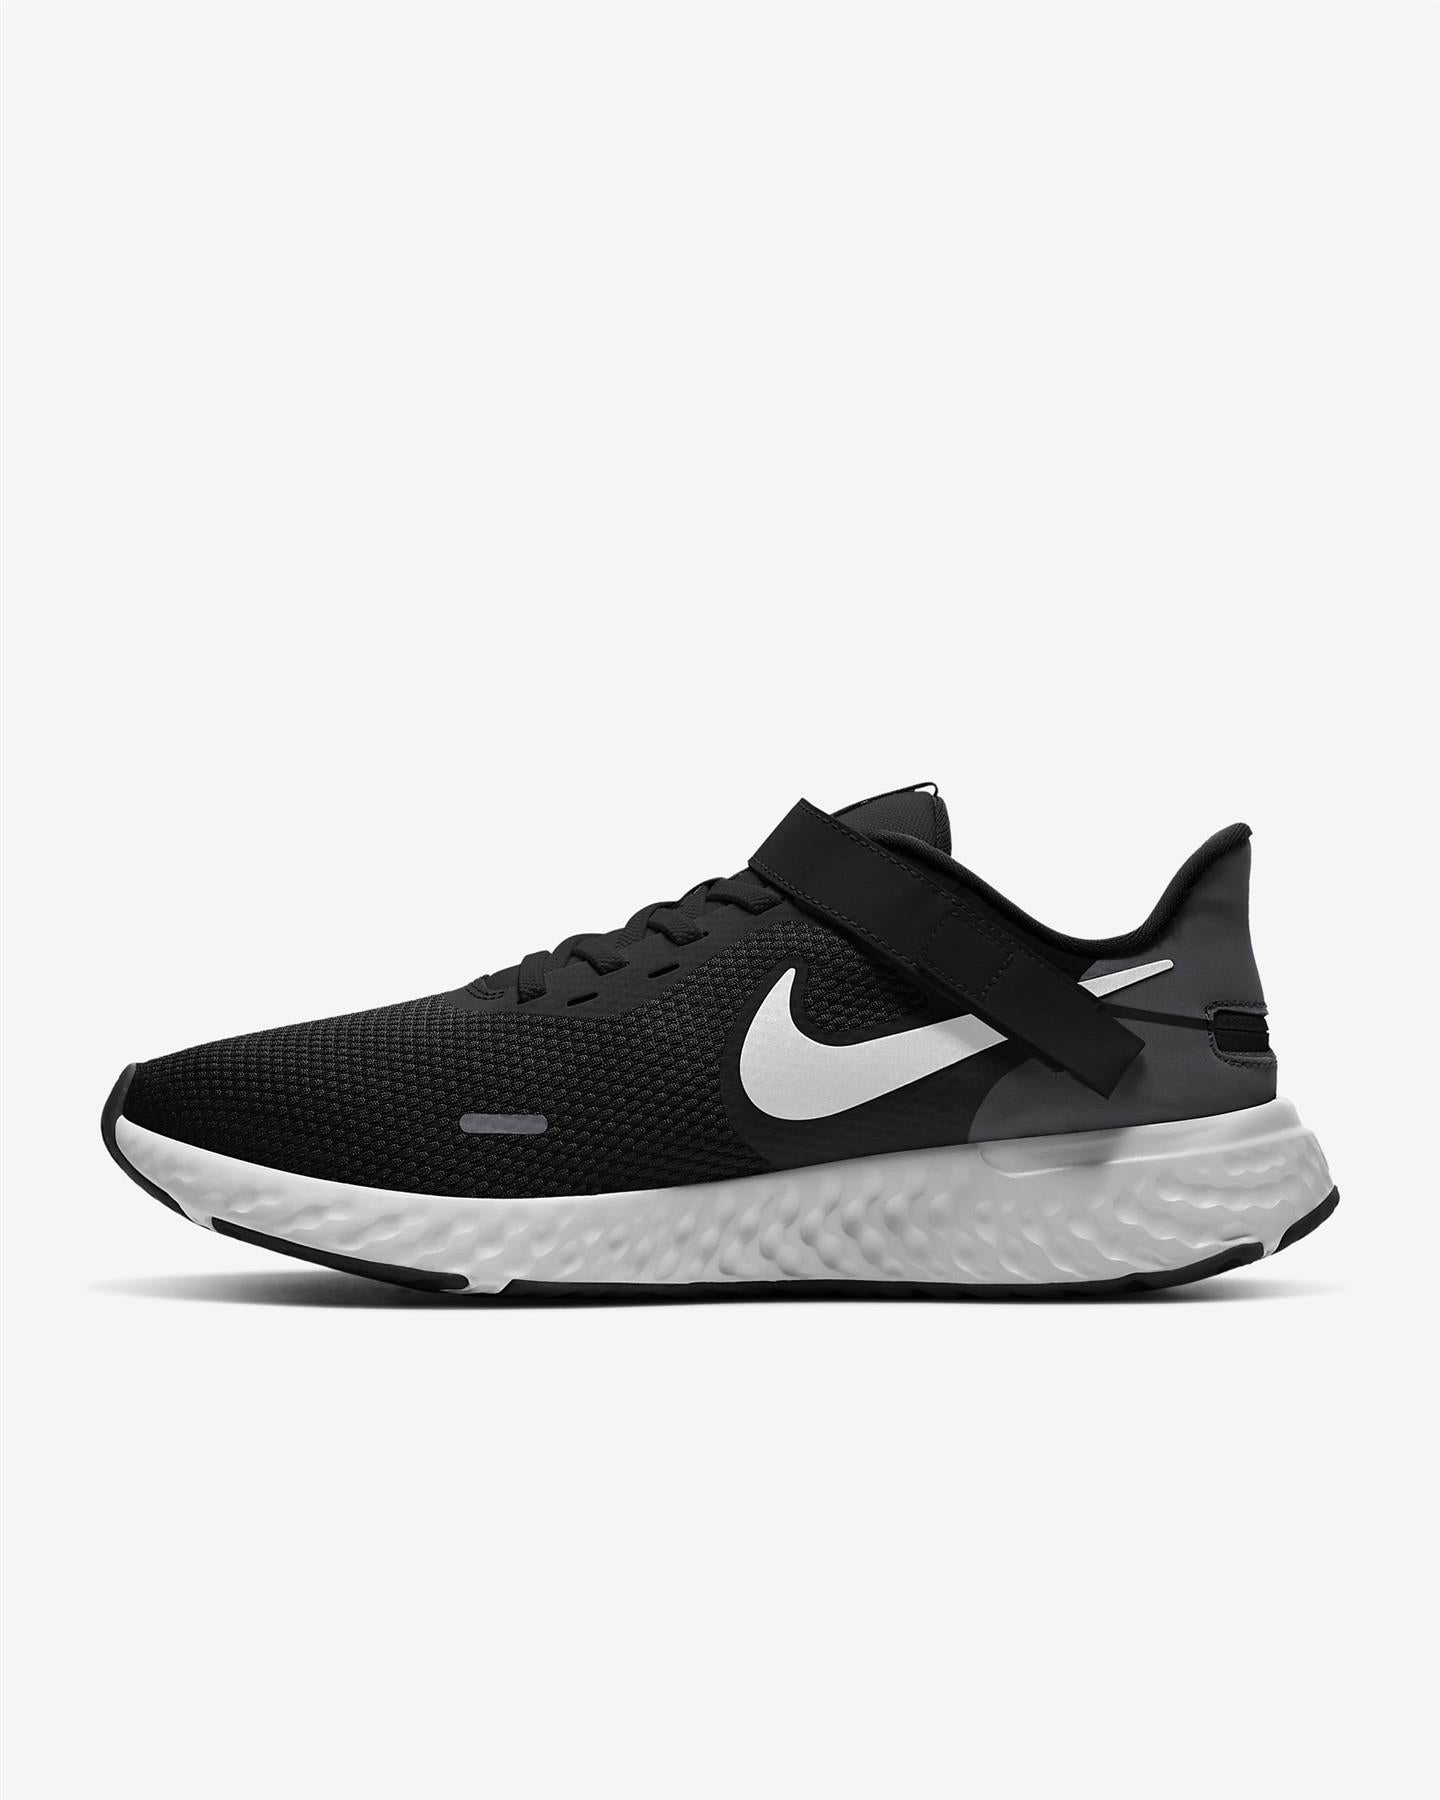 Womens Wide Fit Nike CJ9885 Flyease Running Trainers | NIKE | Wide Fit ...